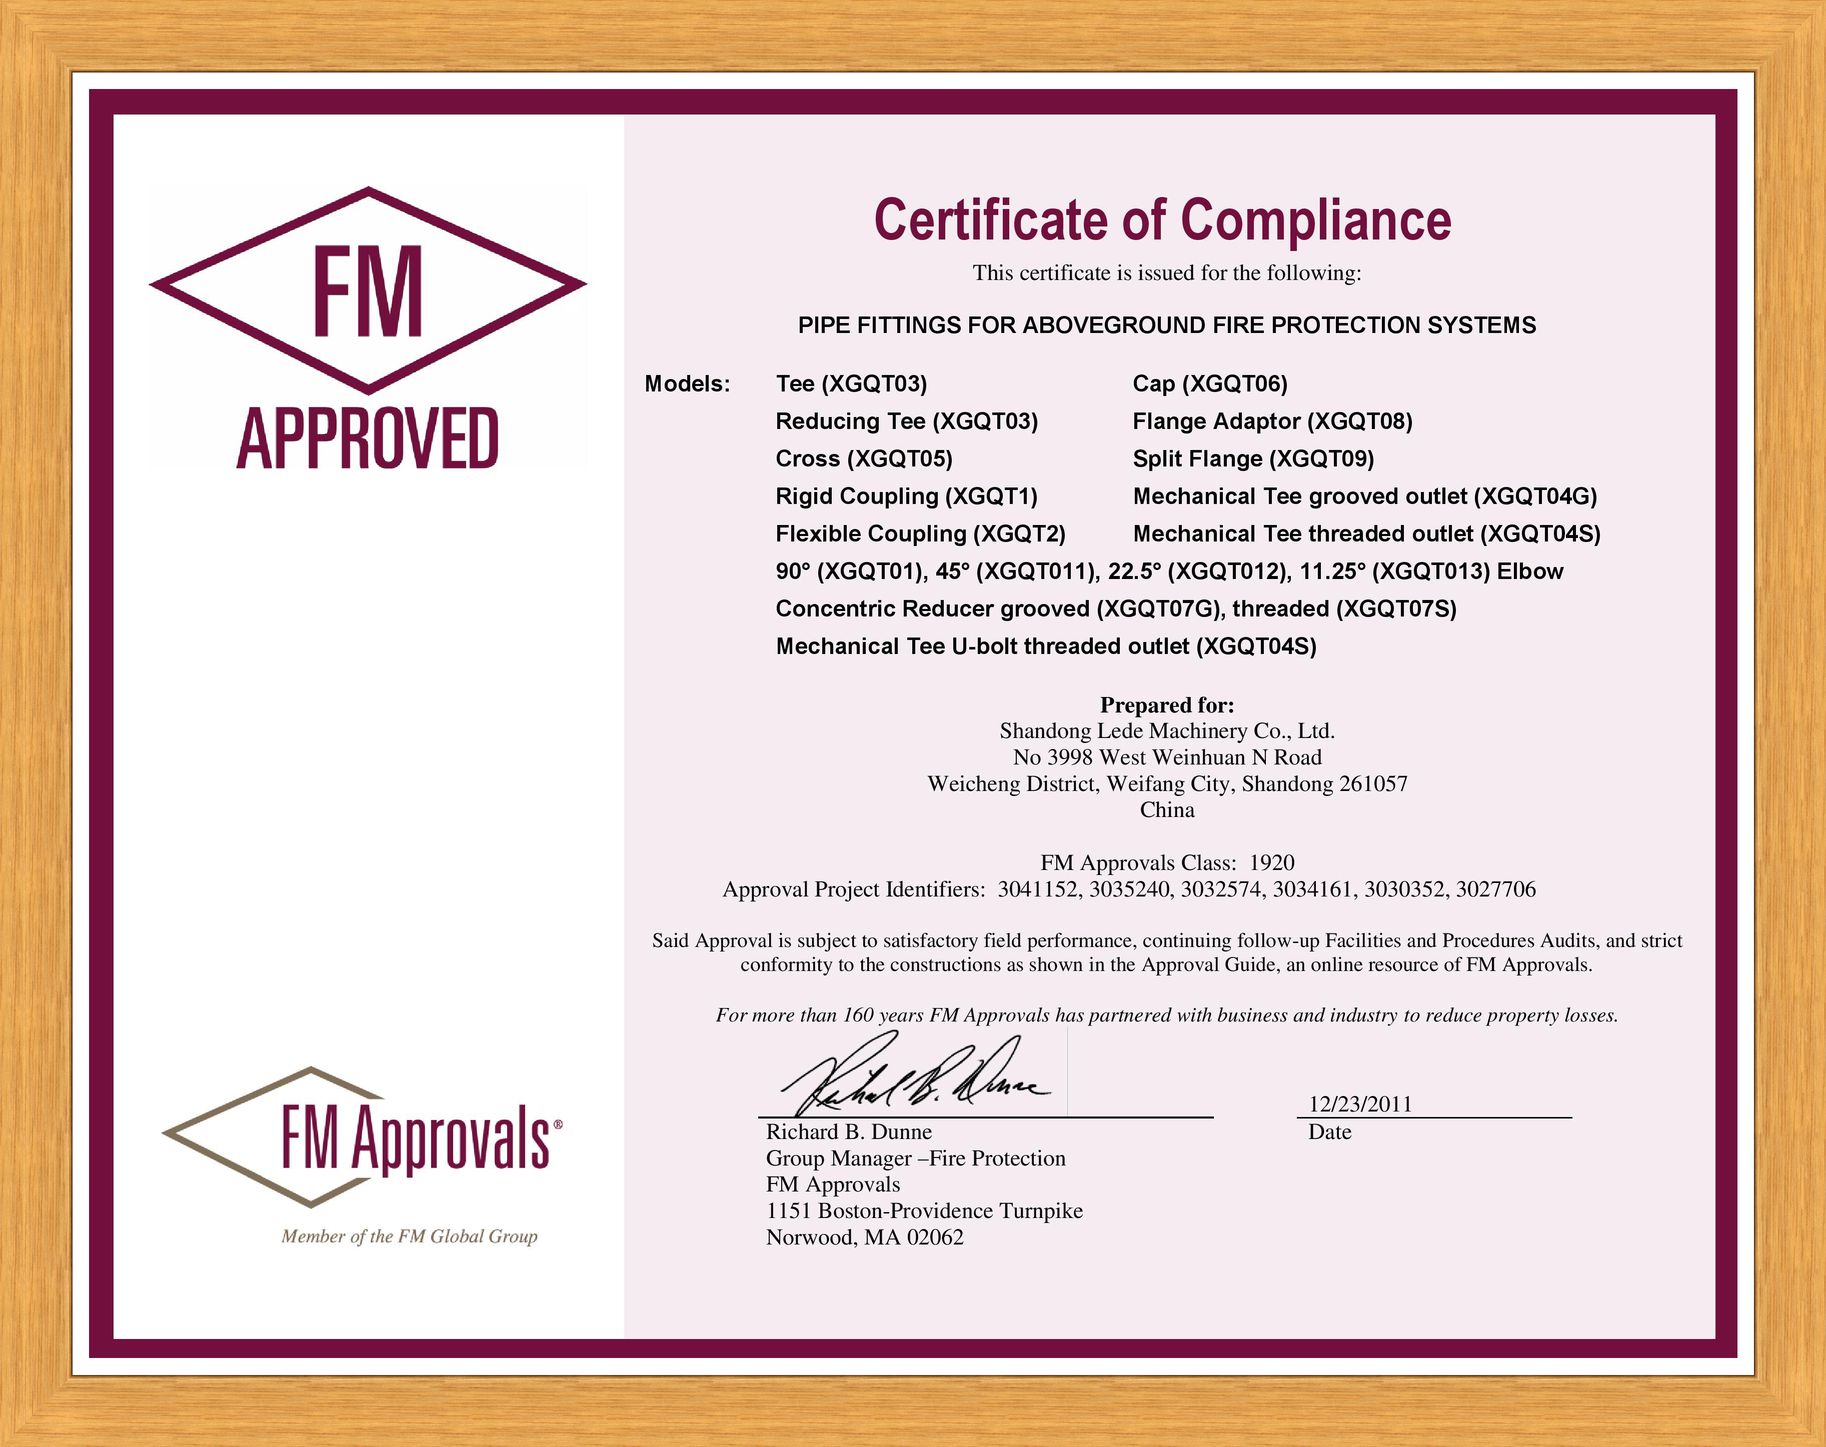 FM Approved sertificate (Fittings and Mechanical tees, Flanges), 2011